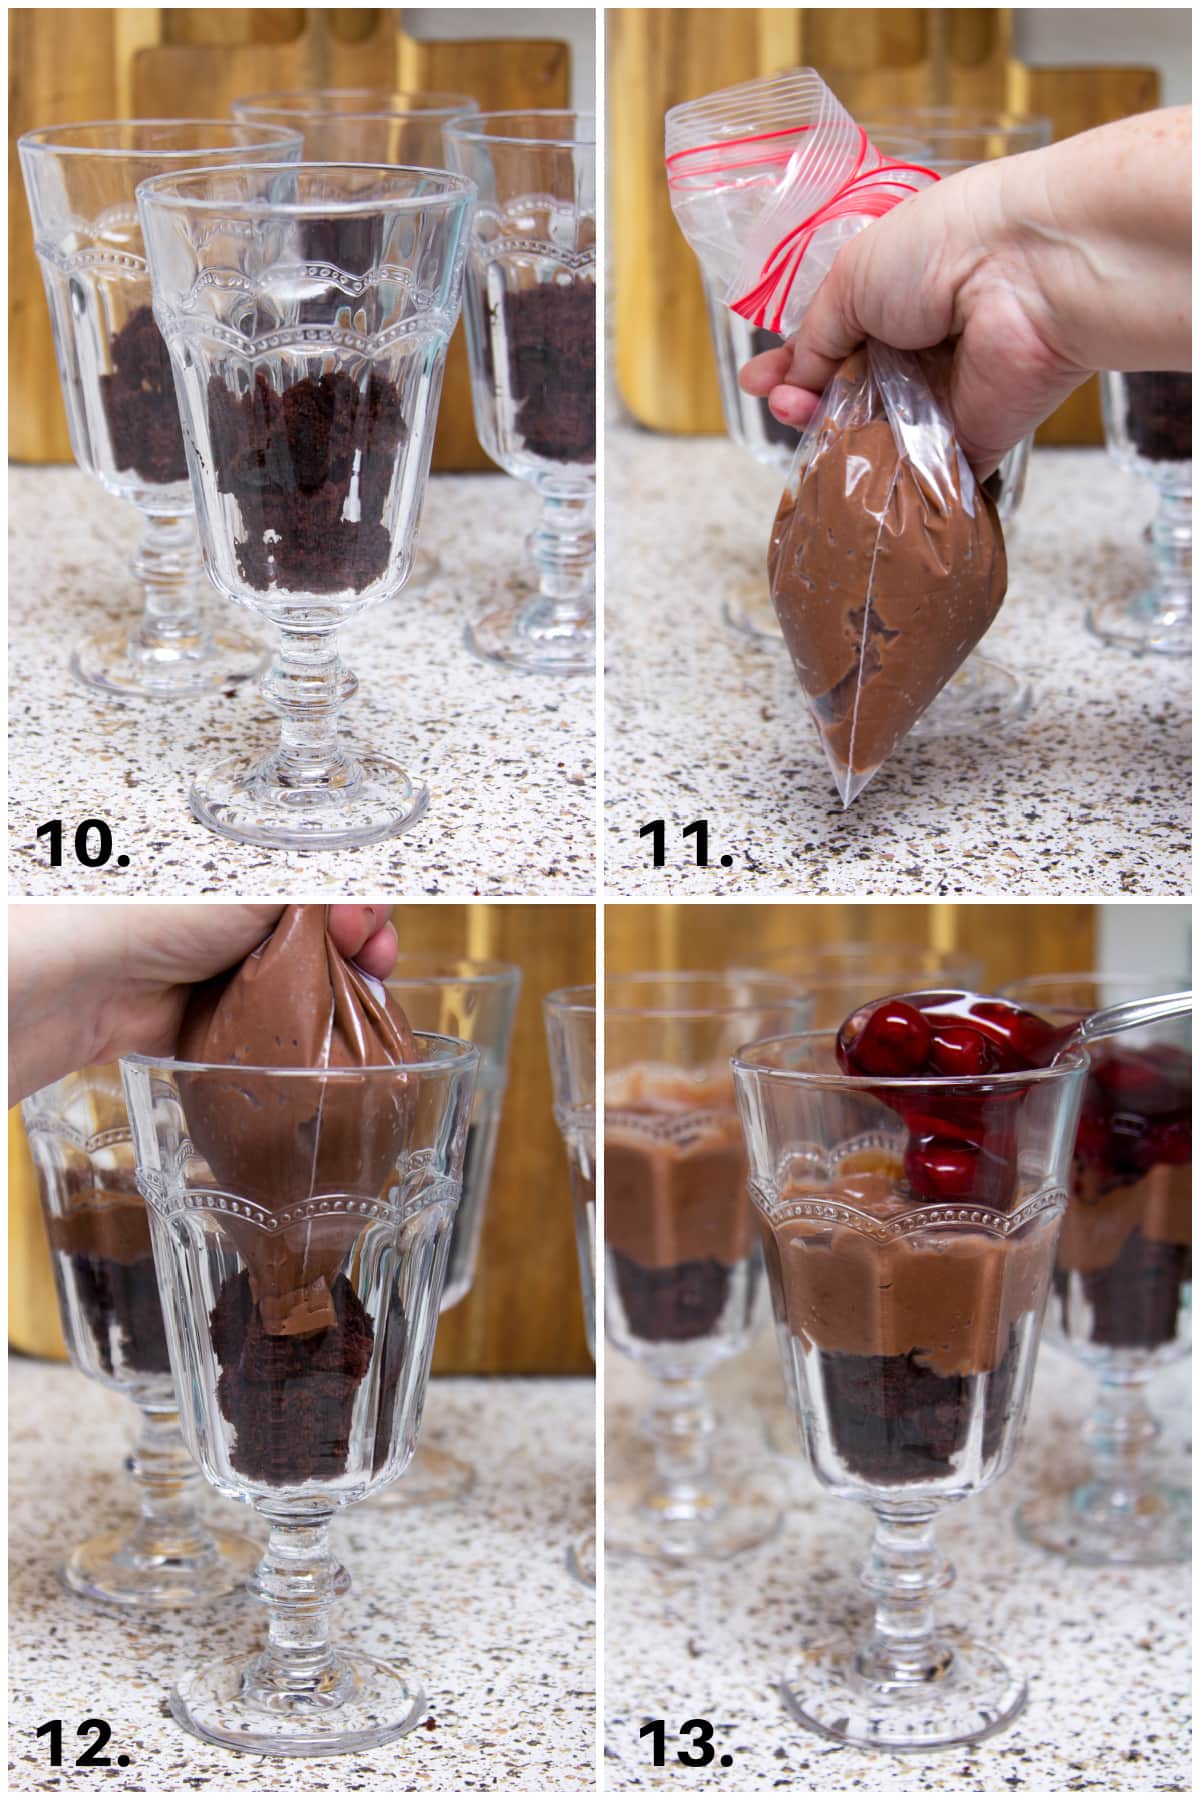 easy egg free black forest trifle recipe images of steps to layer a trifle in glass cups